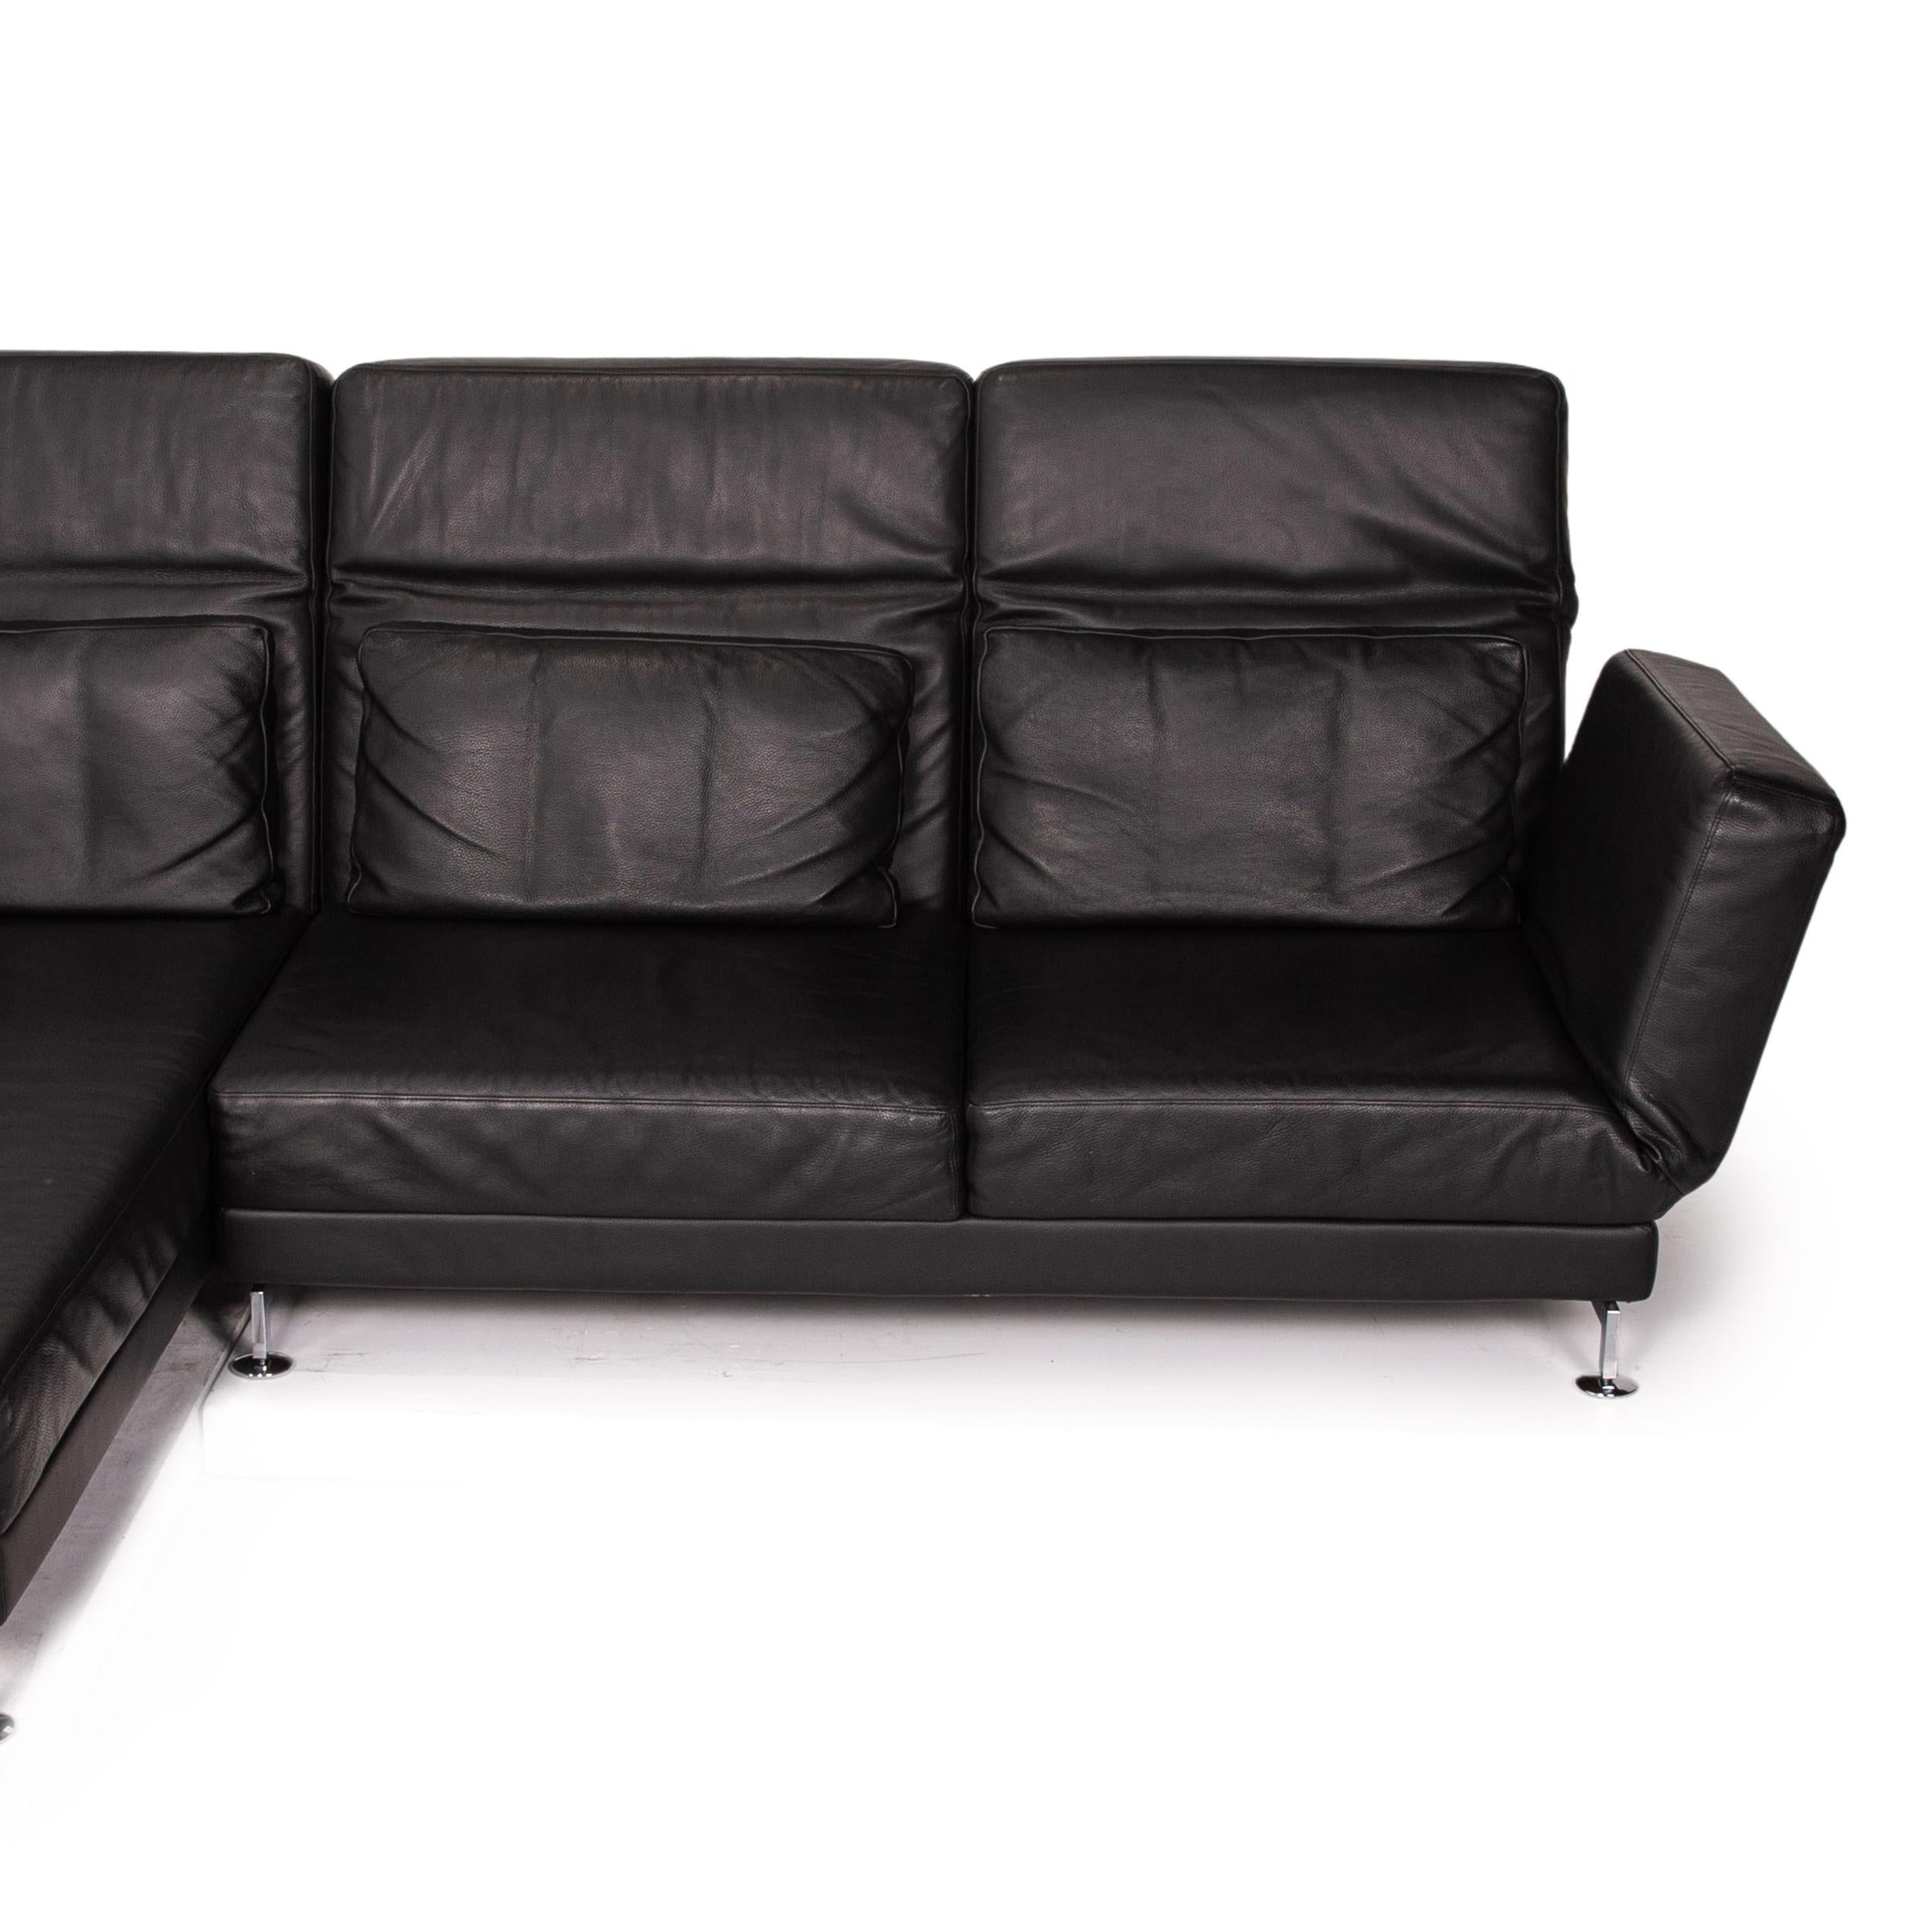 Brühl & Sippold Moule Leather Corner Sofa Black Function Relax Function Couch 2